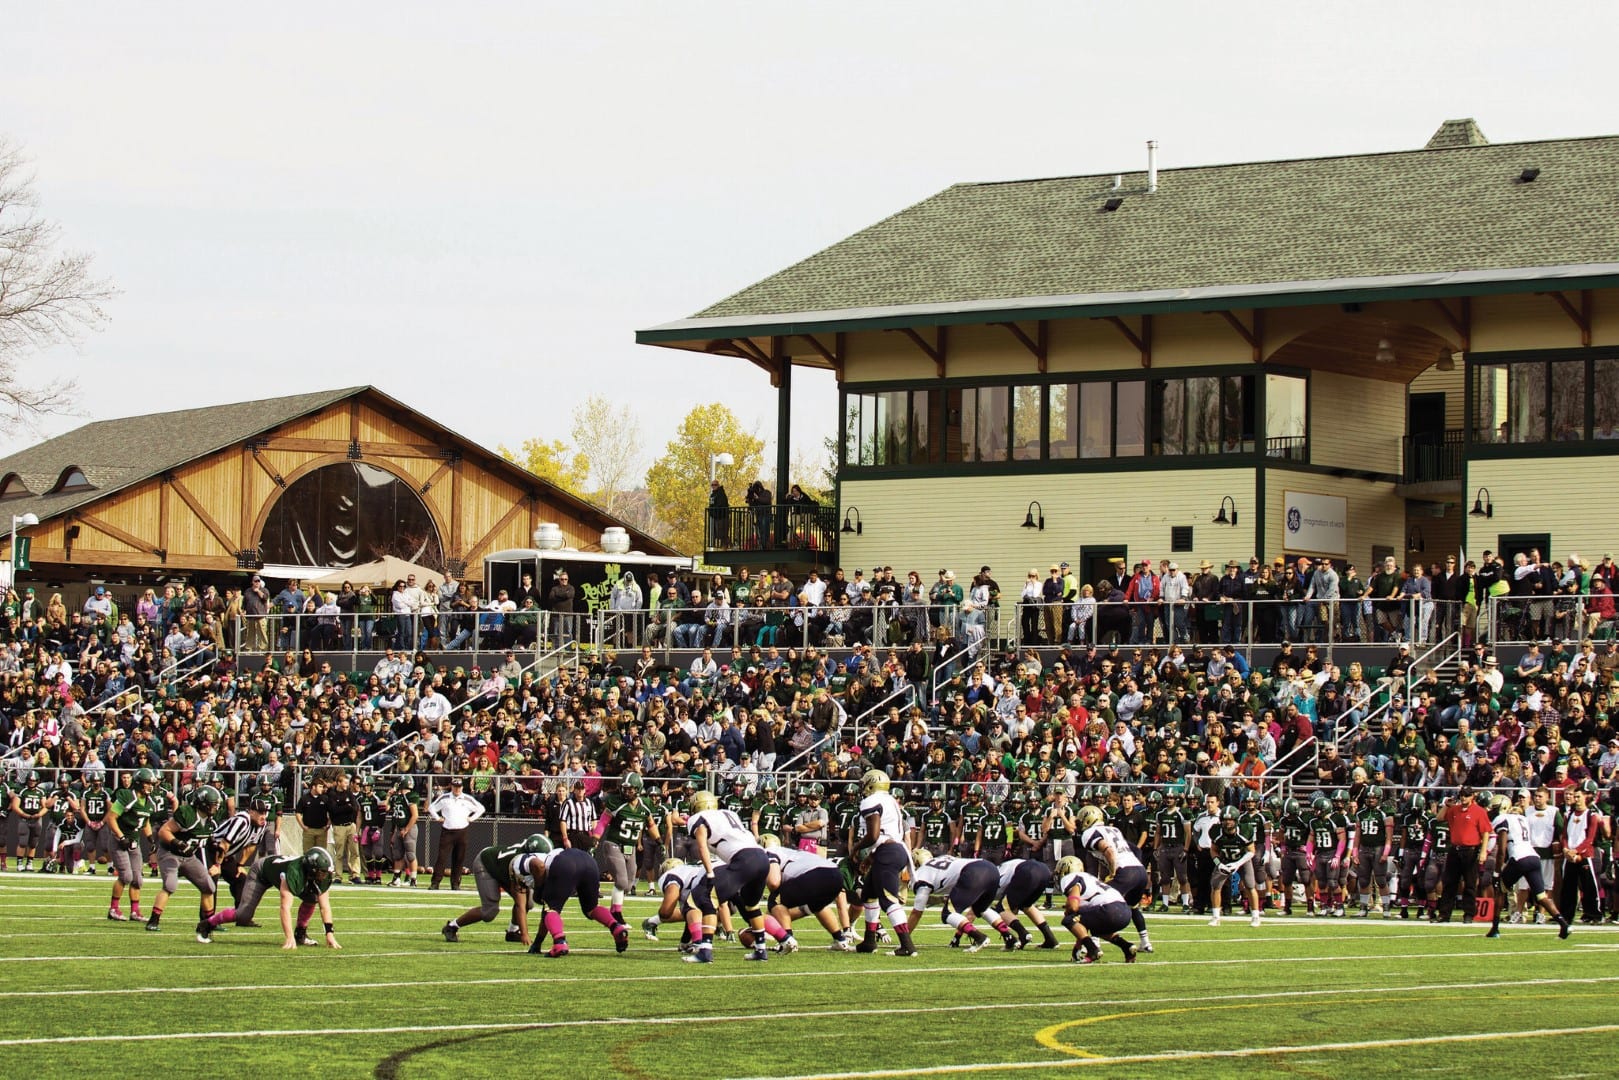 A full stadium cheering a football team on the Vermont State University Castleton campus.